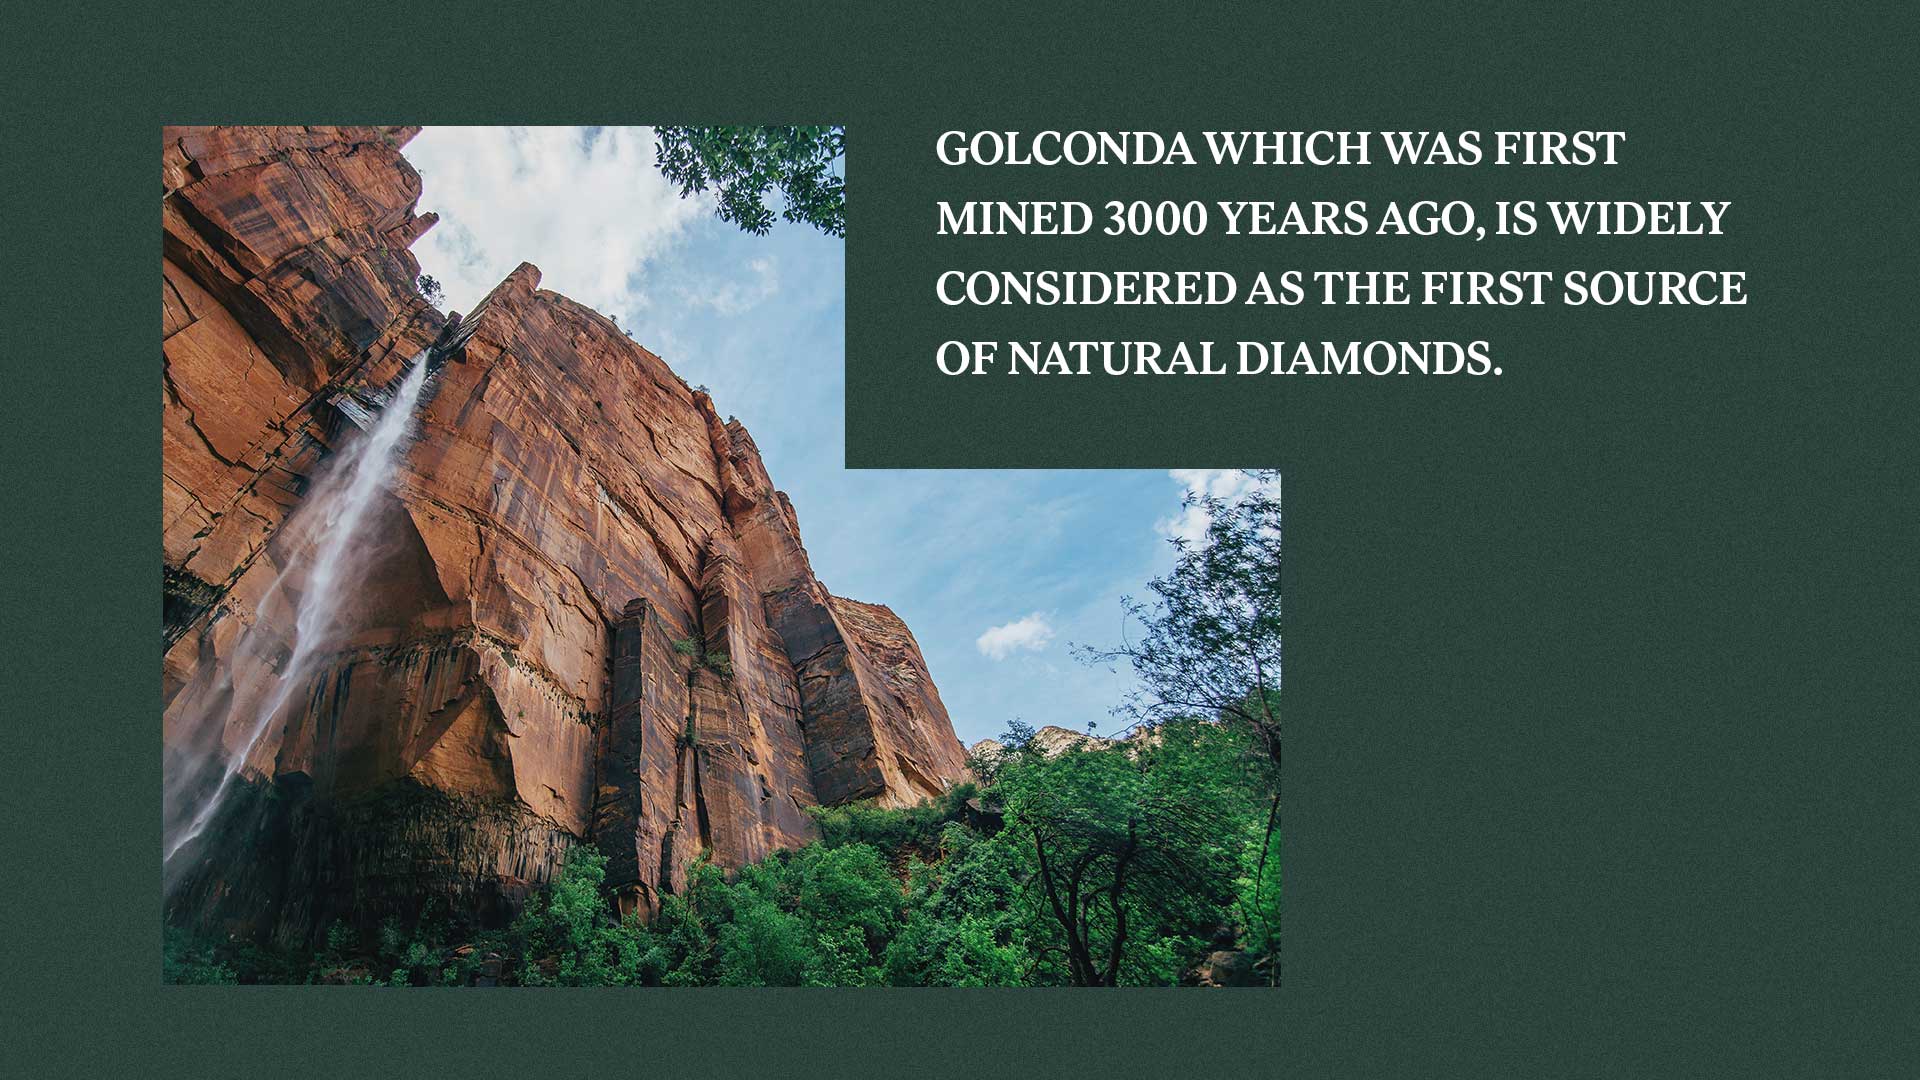 The first source of Natural Diamonds